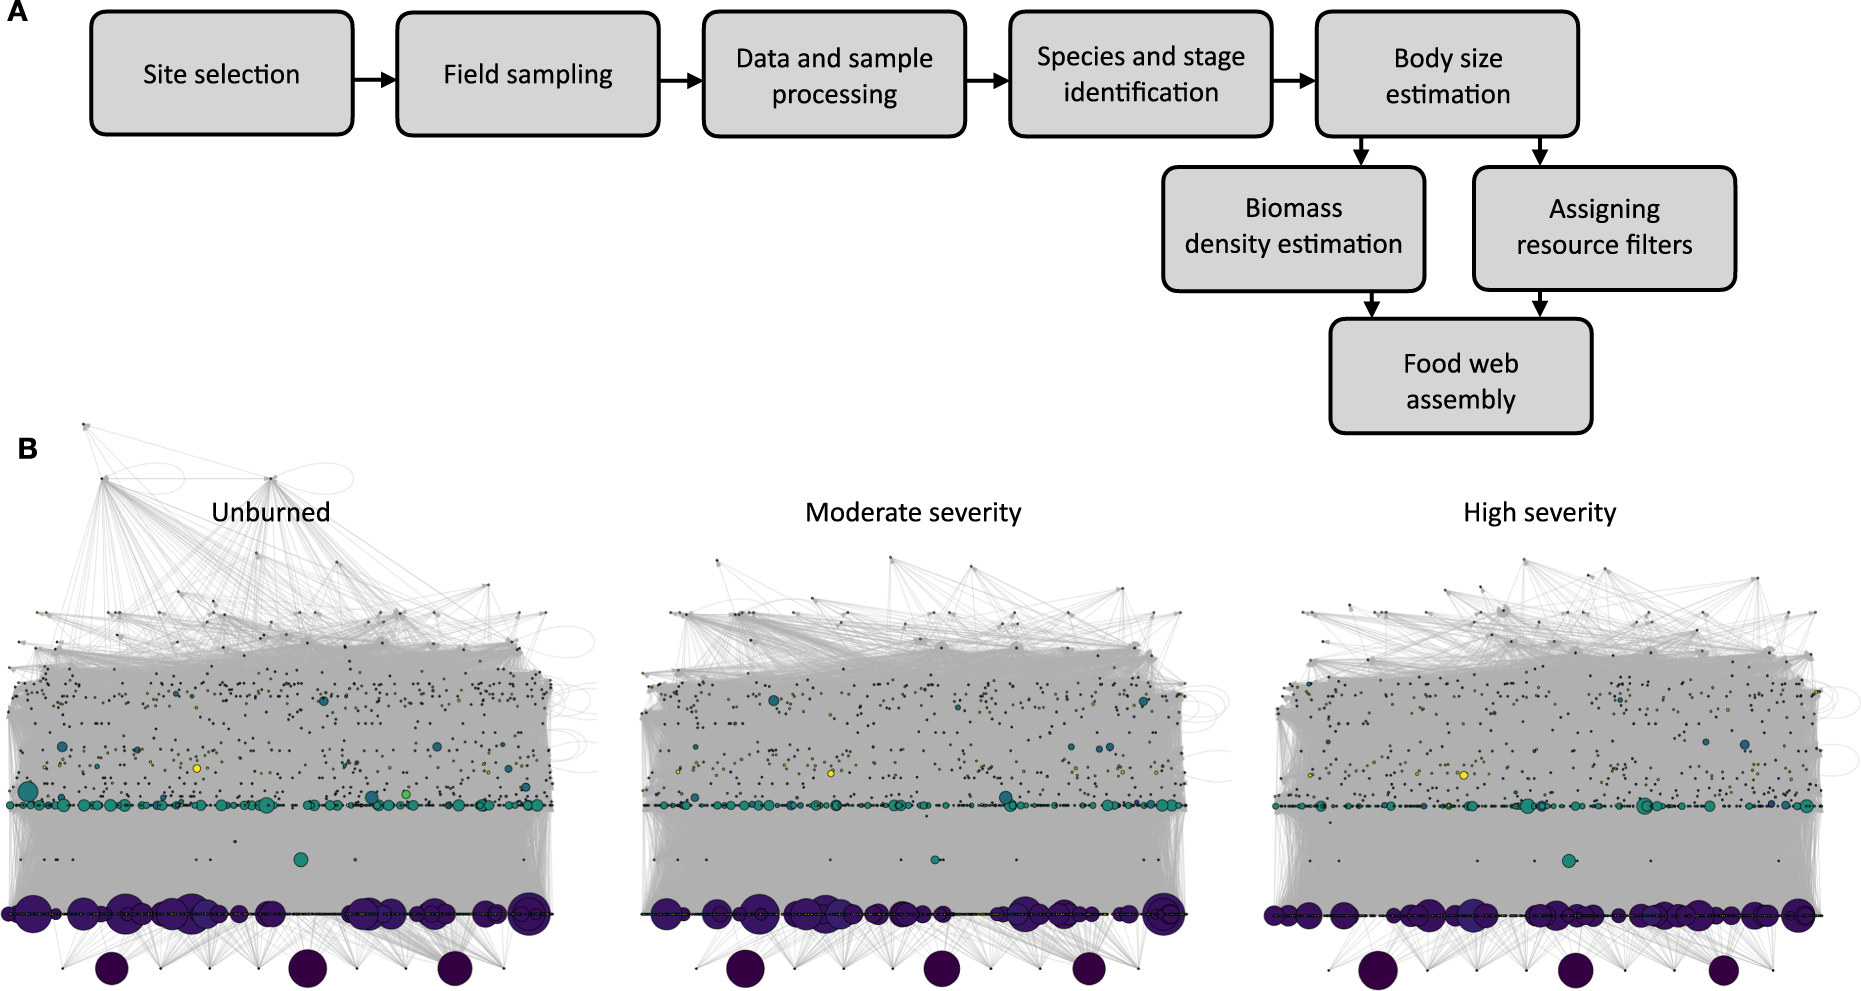 Food webs for three burn severities after wildfire in the Eldorado National  Forest, California | Scientific Data